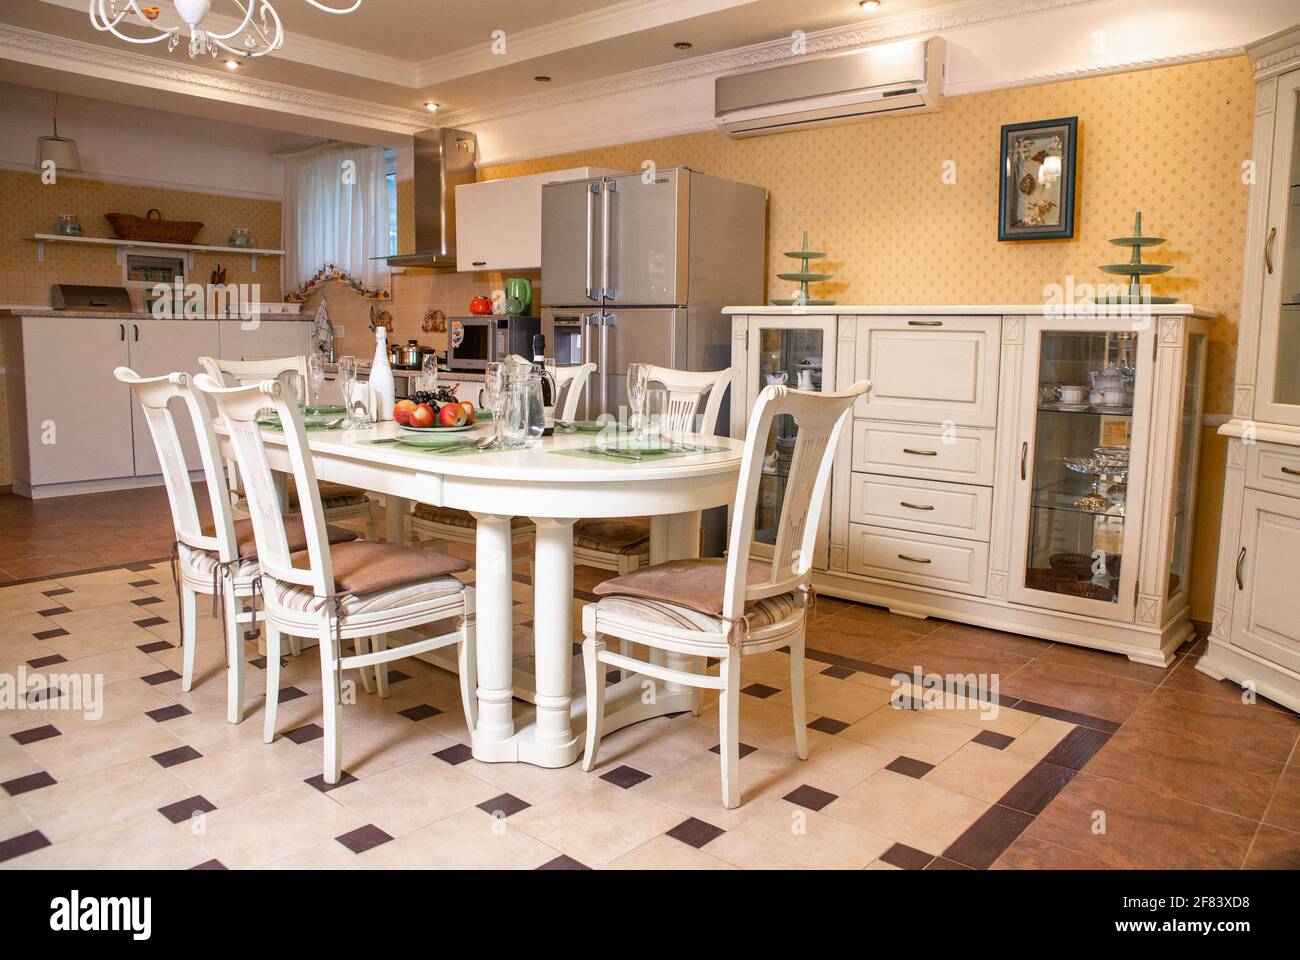 Light kitchen design. a cozy area for eating. Stock Photo